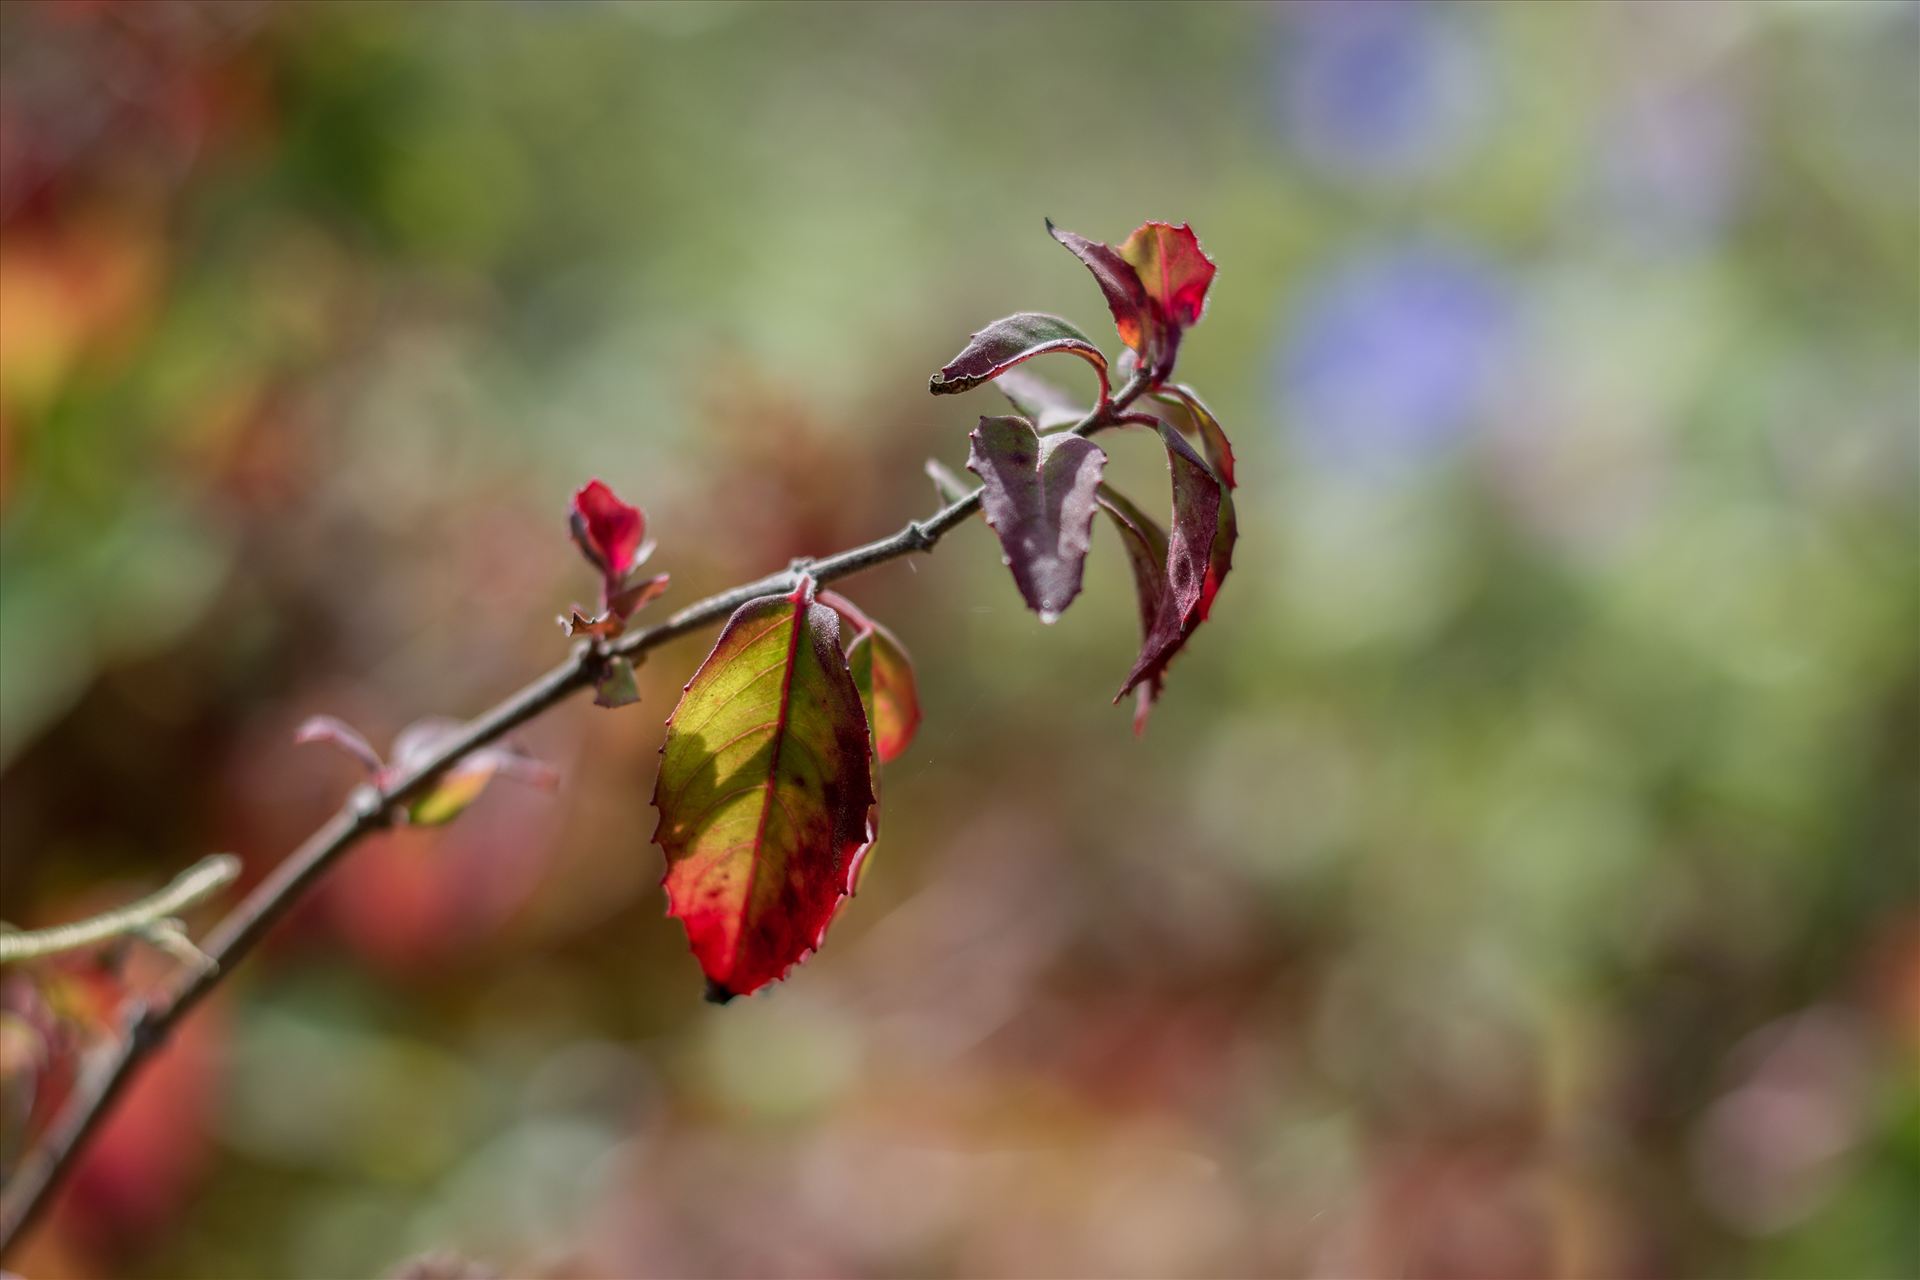 Leaves in the Sun 10272015.jpg Sunlight falling on leaves that are changing colors during the transition from Summer to Fall on California's Central Coast by Sarah Williams